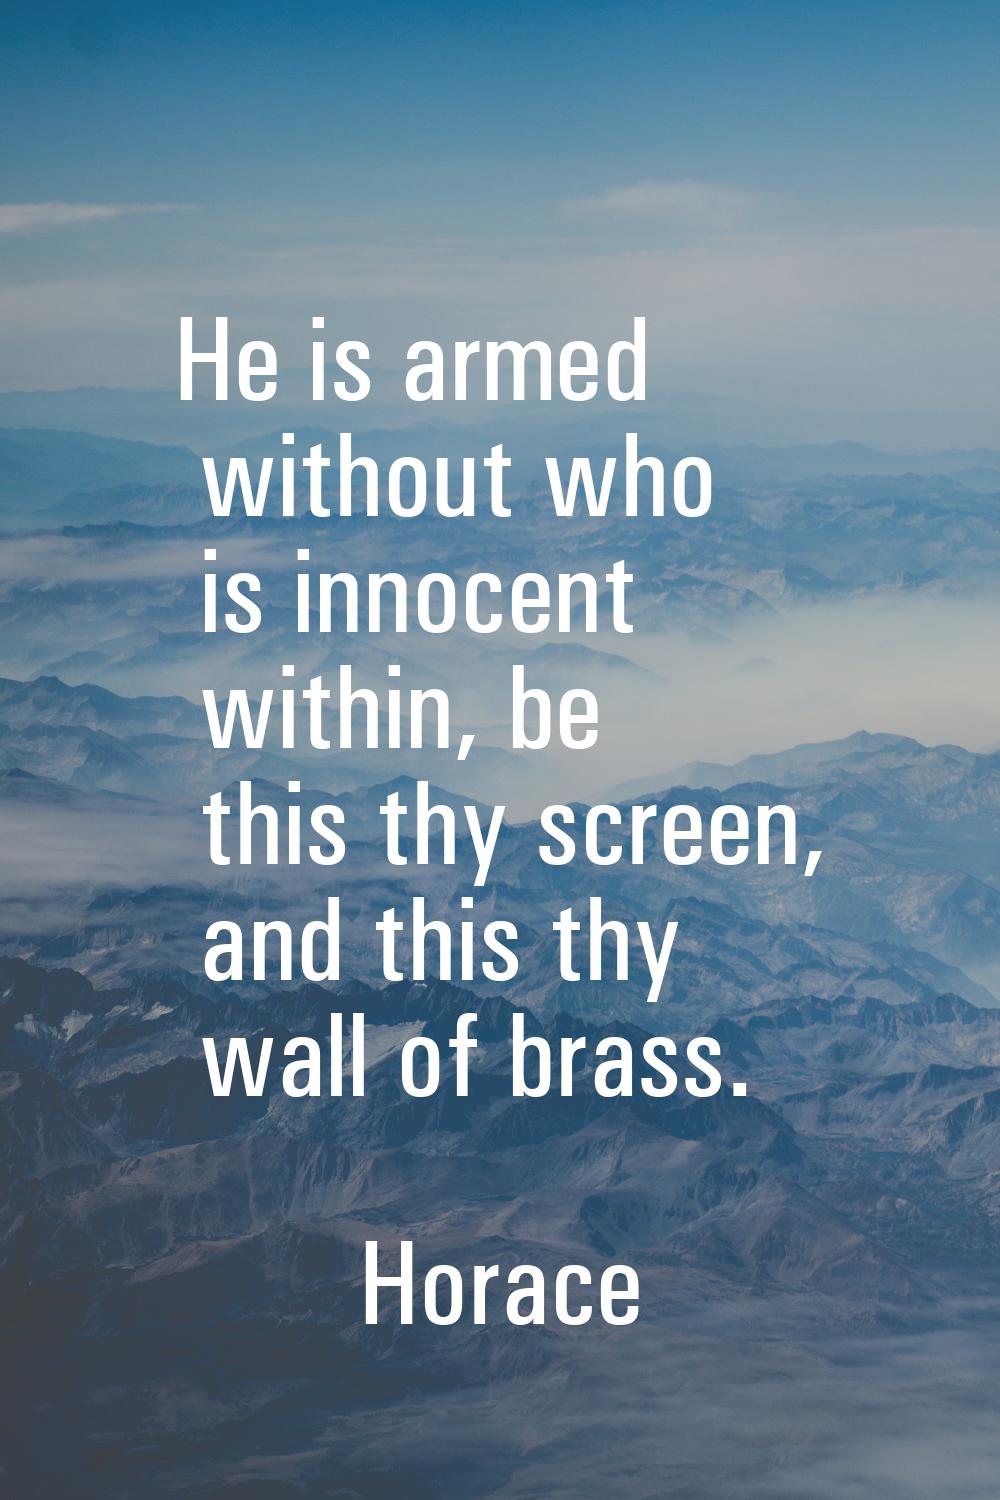 He is armed without who is innocent within, be this thy screen, and this thy wall of brass.